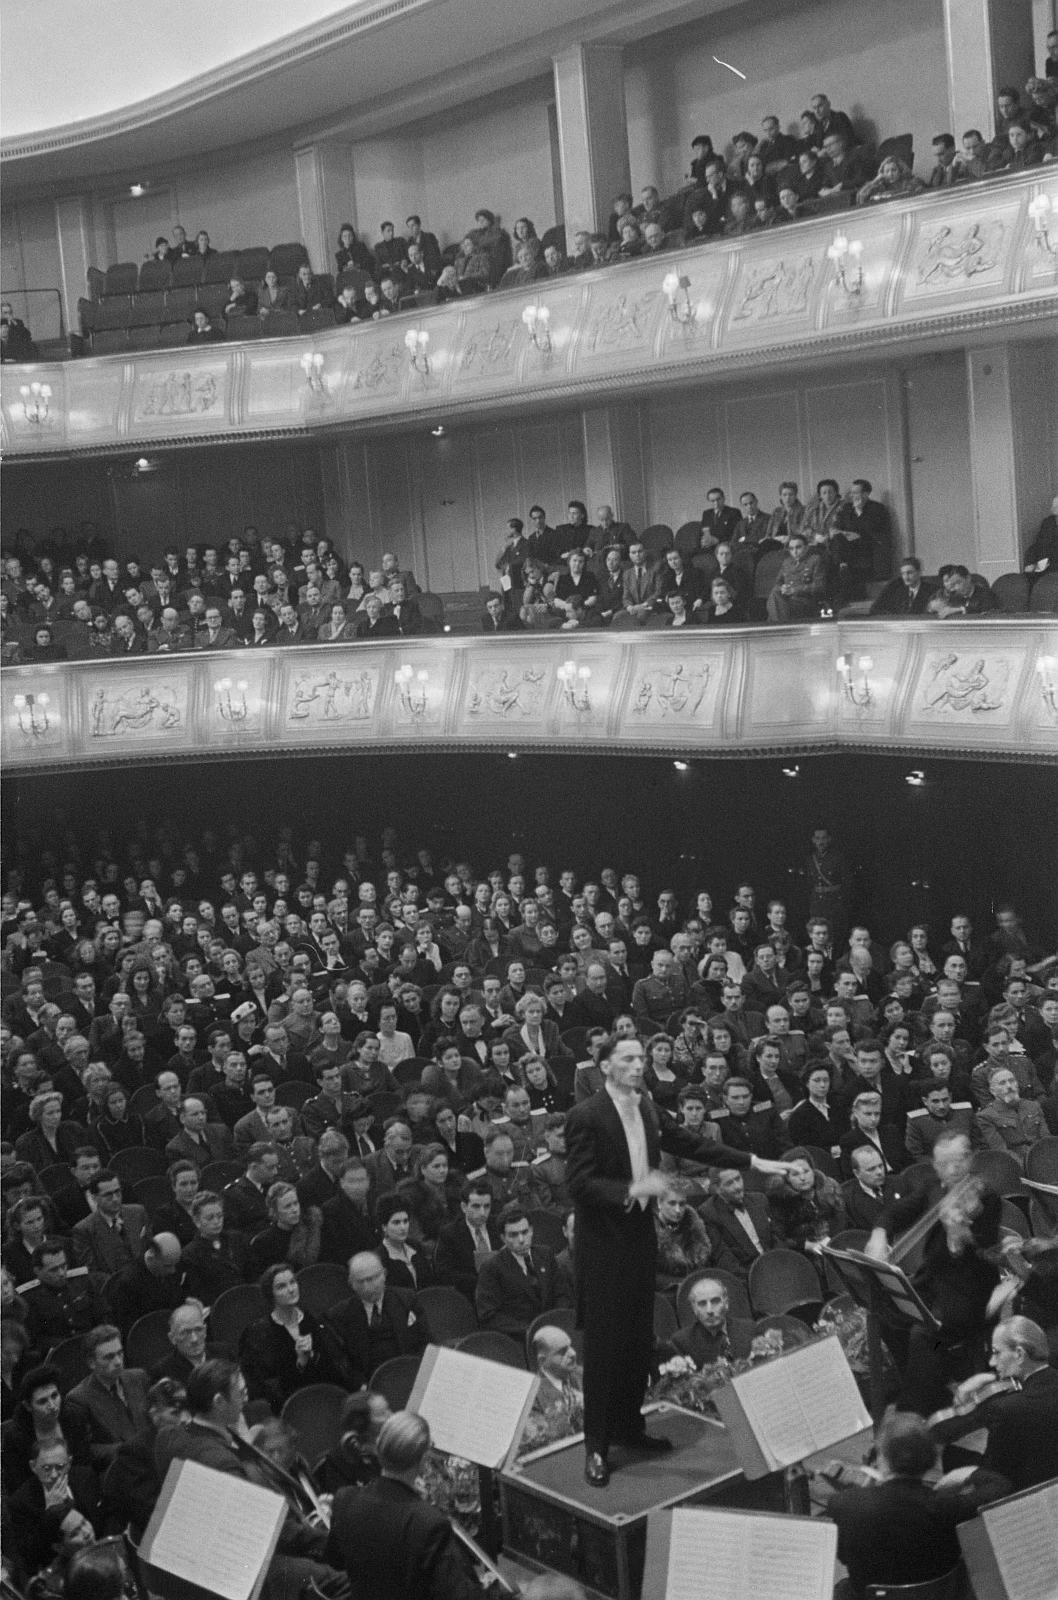 black and white photograph, a conductor and orchestra in a busy concert hall